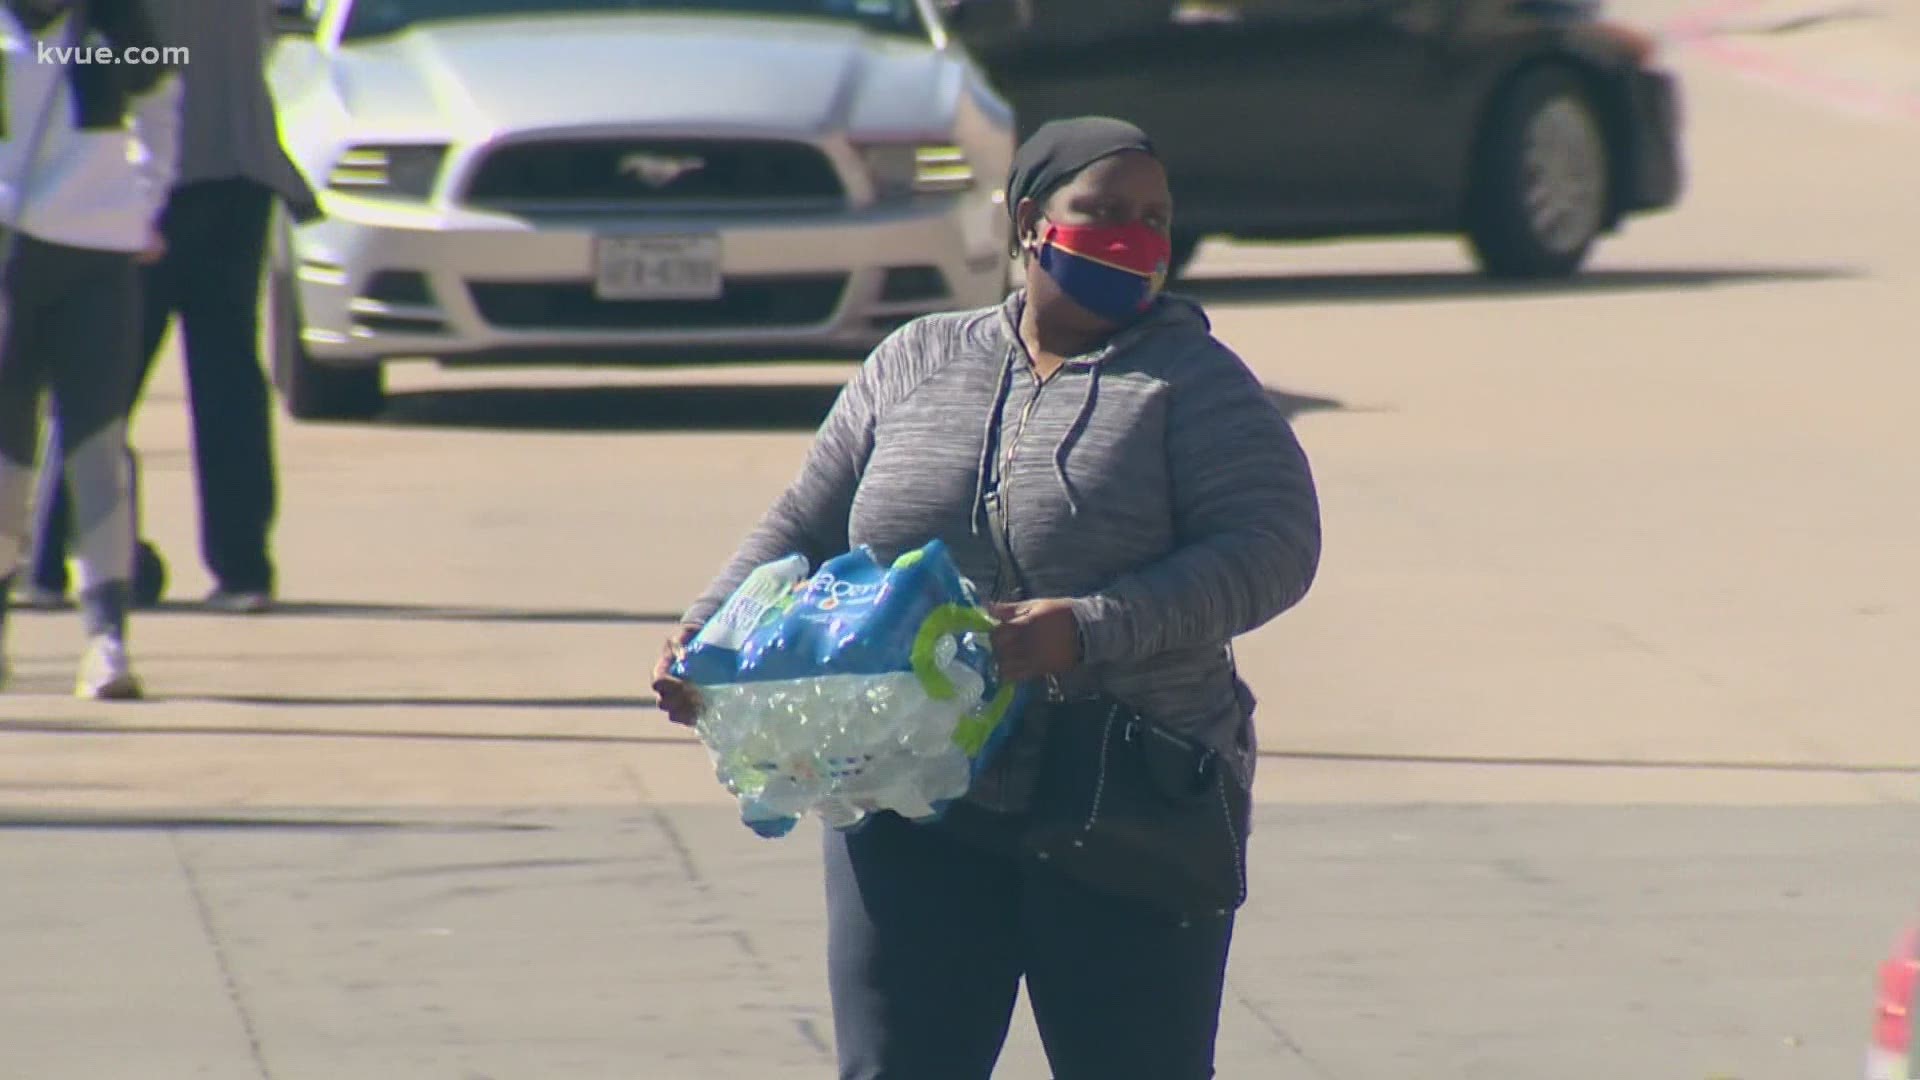 Austin groups helped distribute bottled water amid a city-wide boil water notice. Community groups helped seniors and home-bound residents with medical needs.